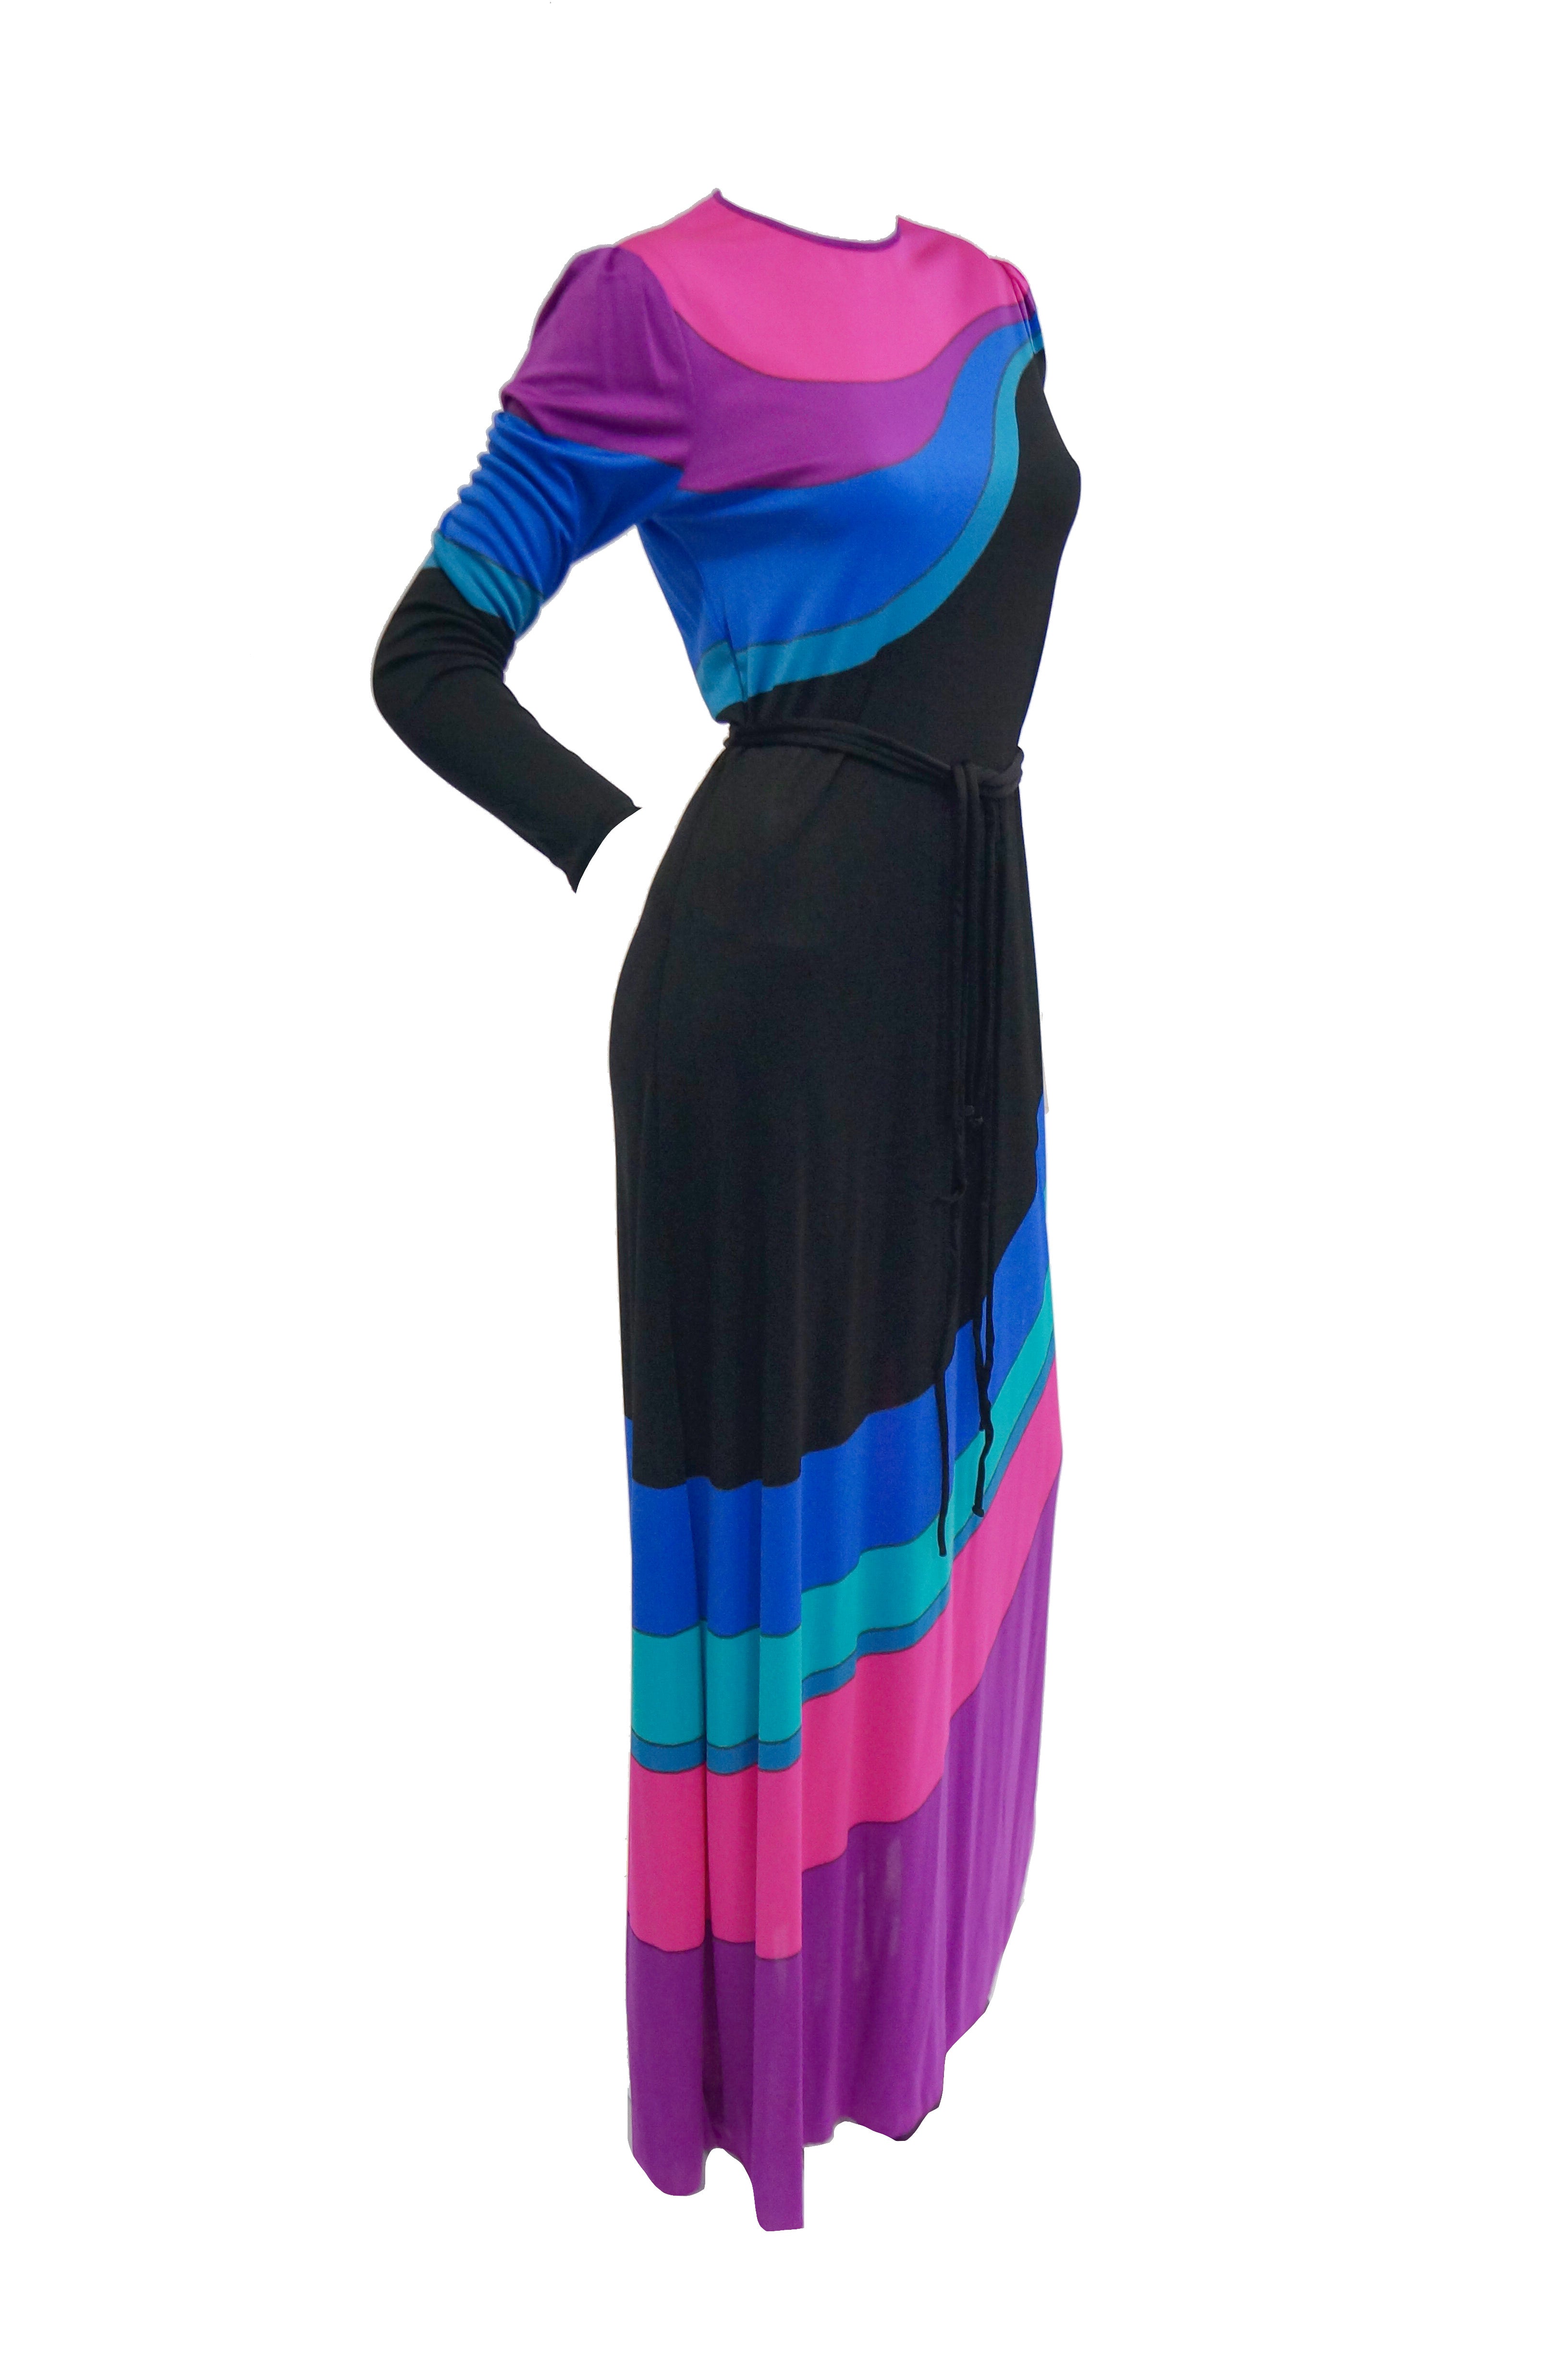 1970s Louis Feraud Vibrant Graphic Pink Blue and Black Swirl Knit